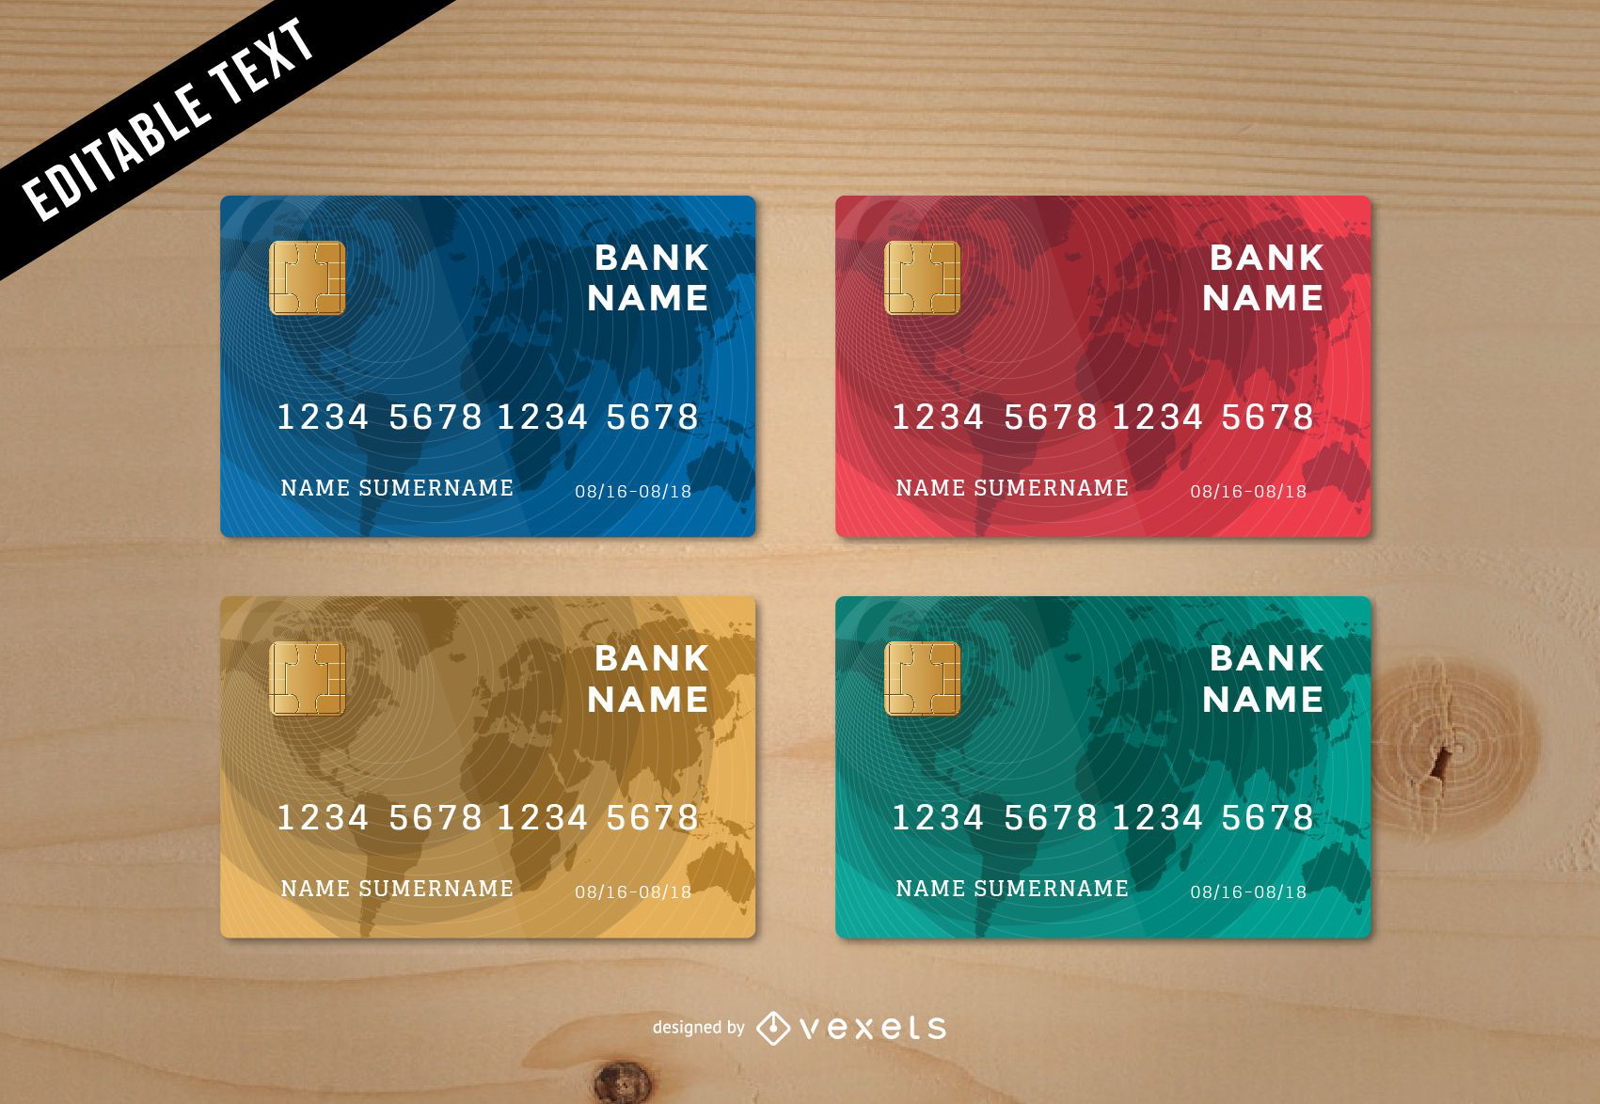 Stunning Credit Card Template Vector Download